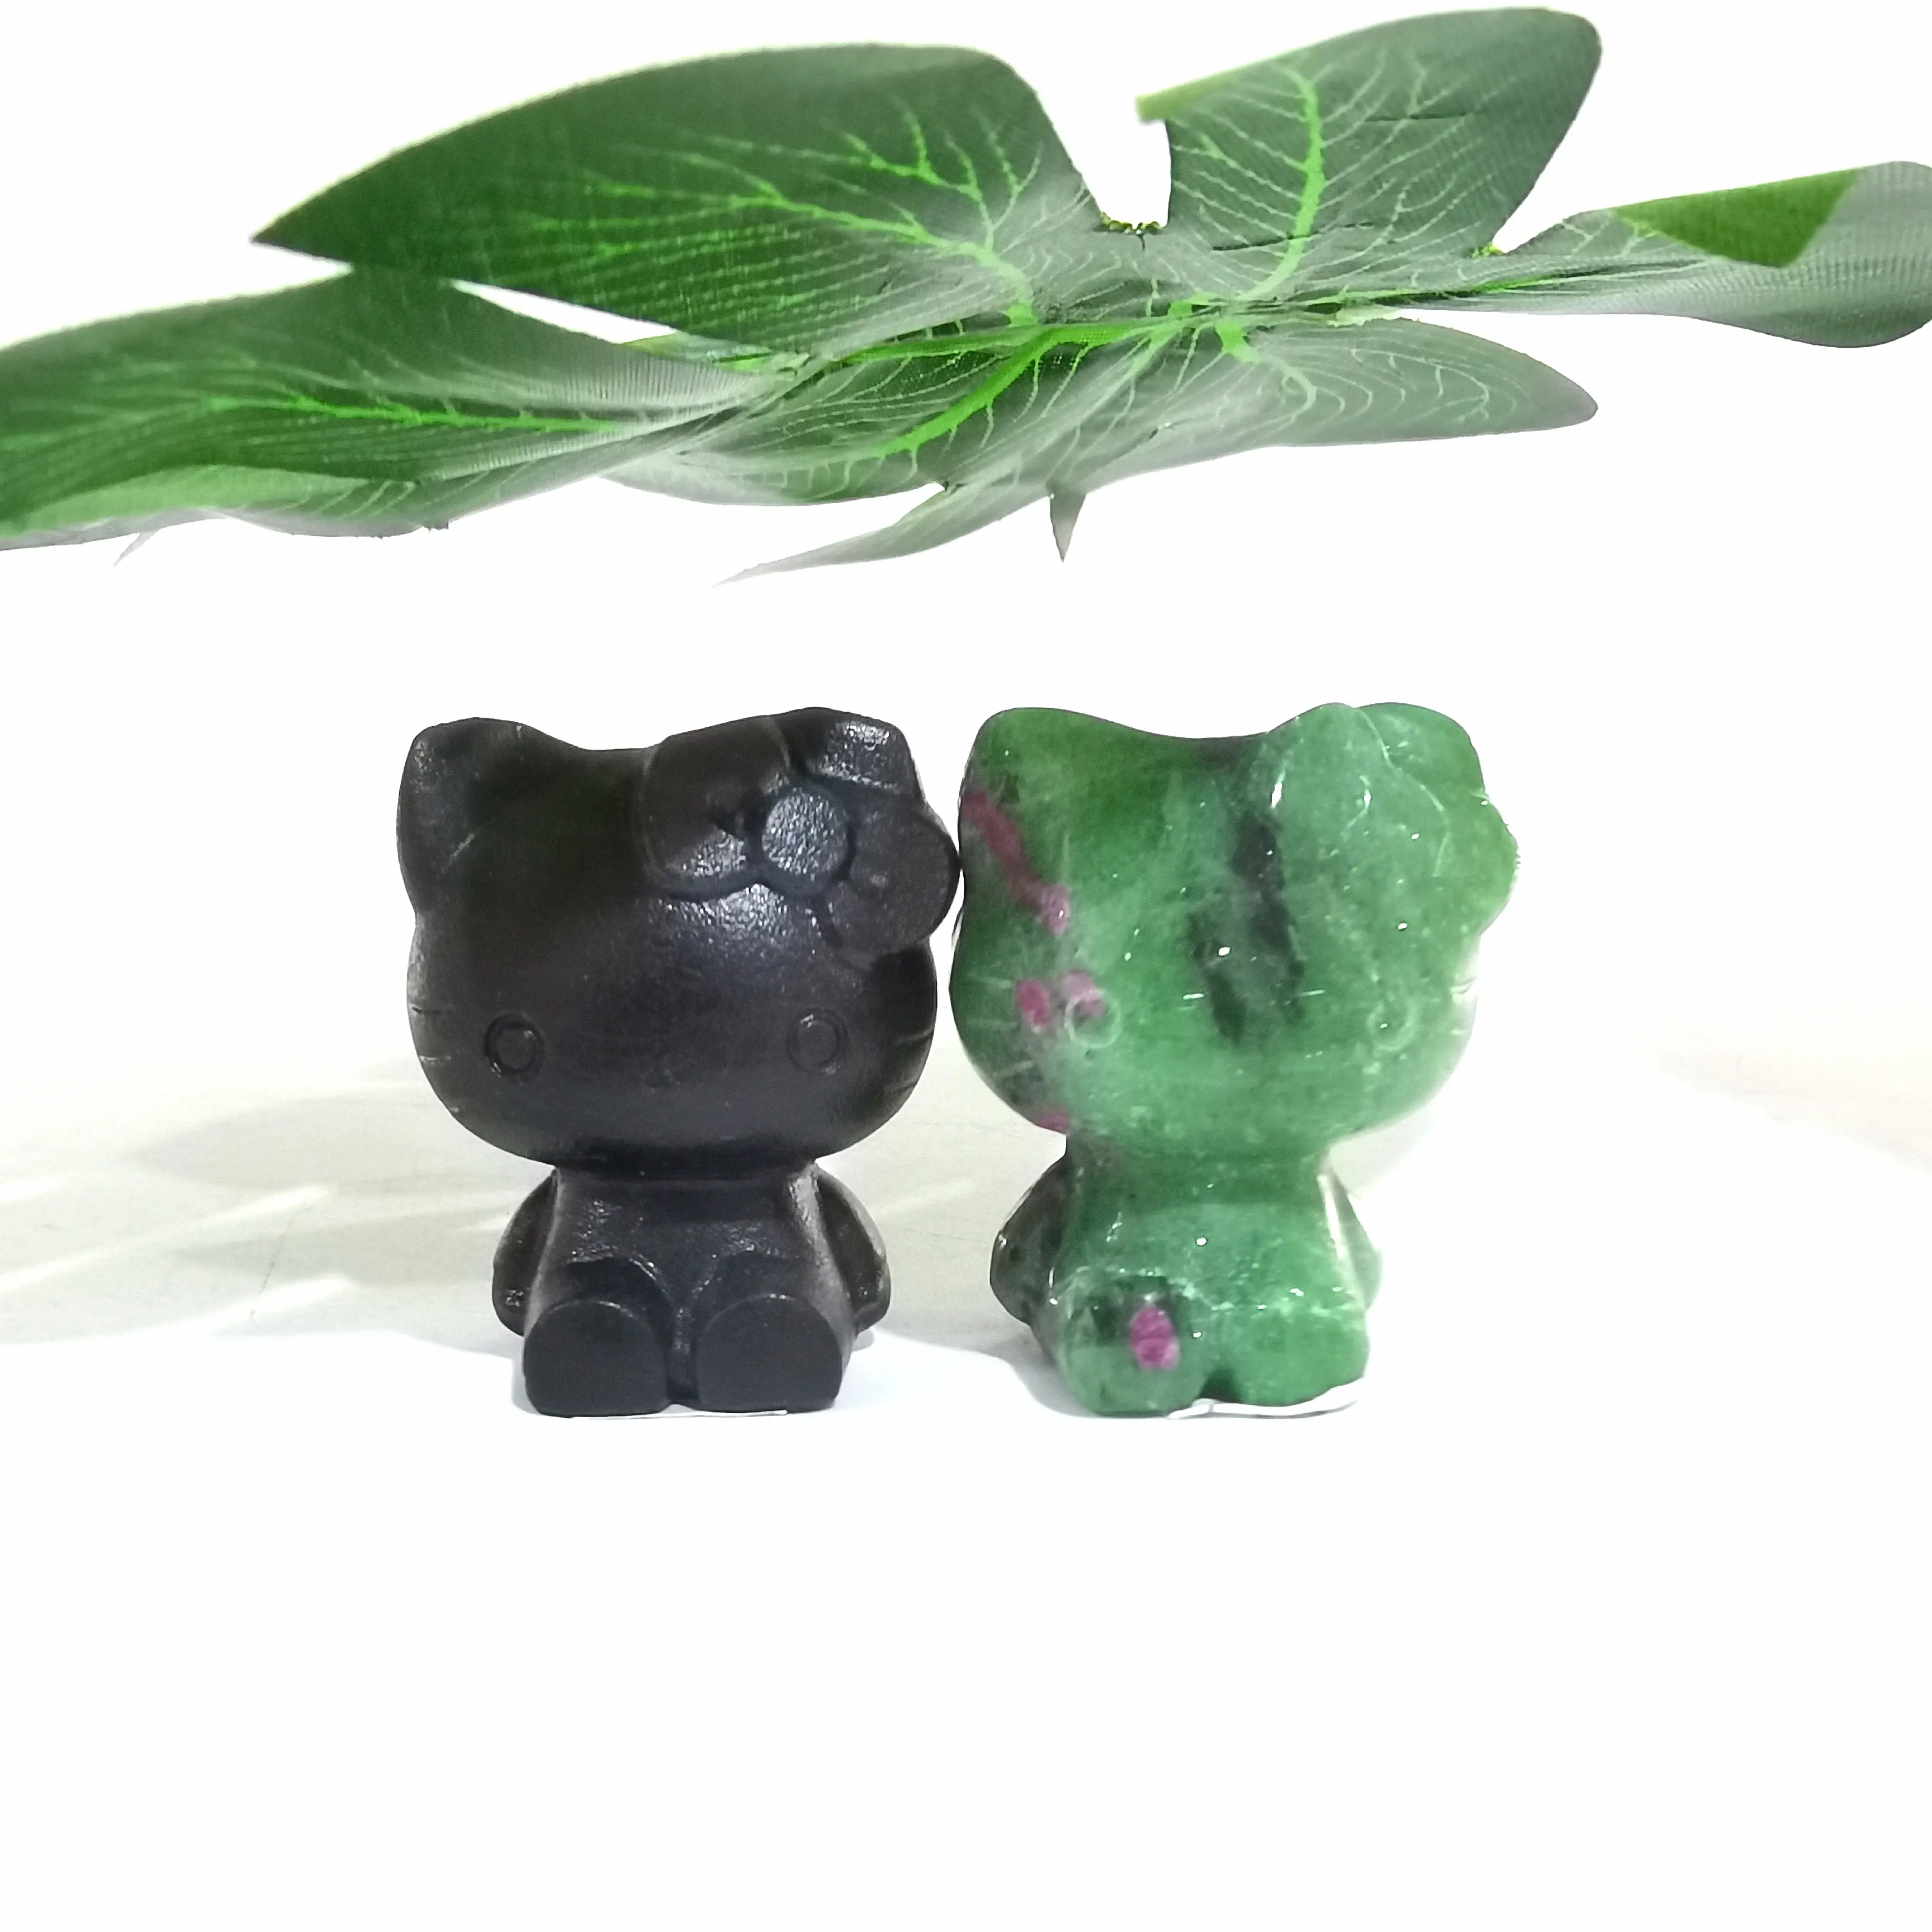 Crystal Cat Wholesale Natural Crystals Healing Gemstone Hand Carved Ruby In Zoisite Cat Crystal Crafts For Gift